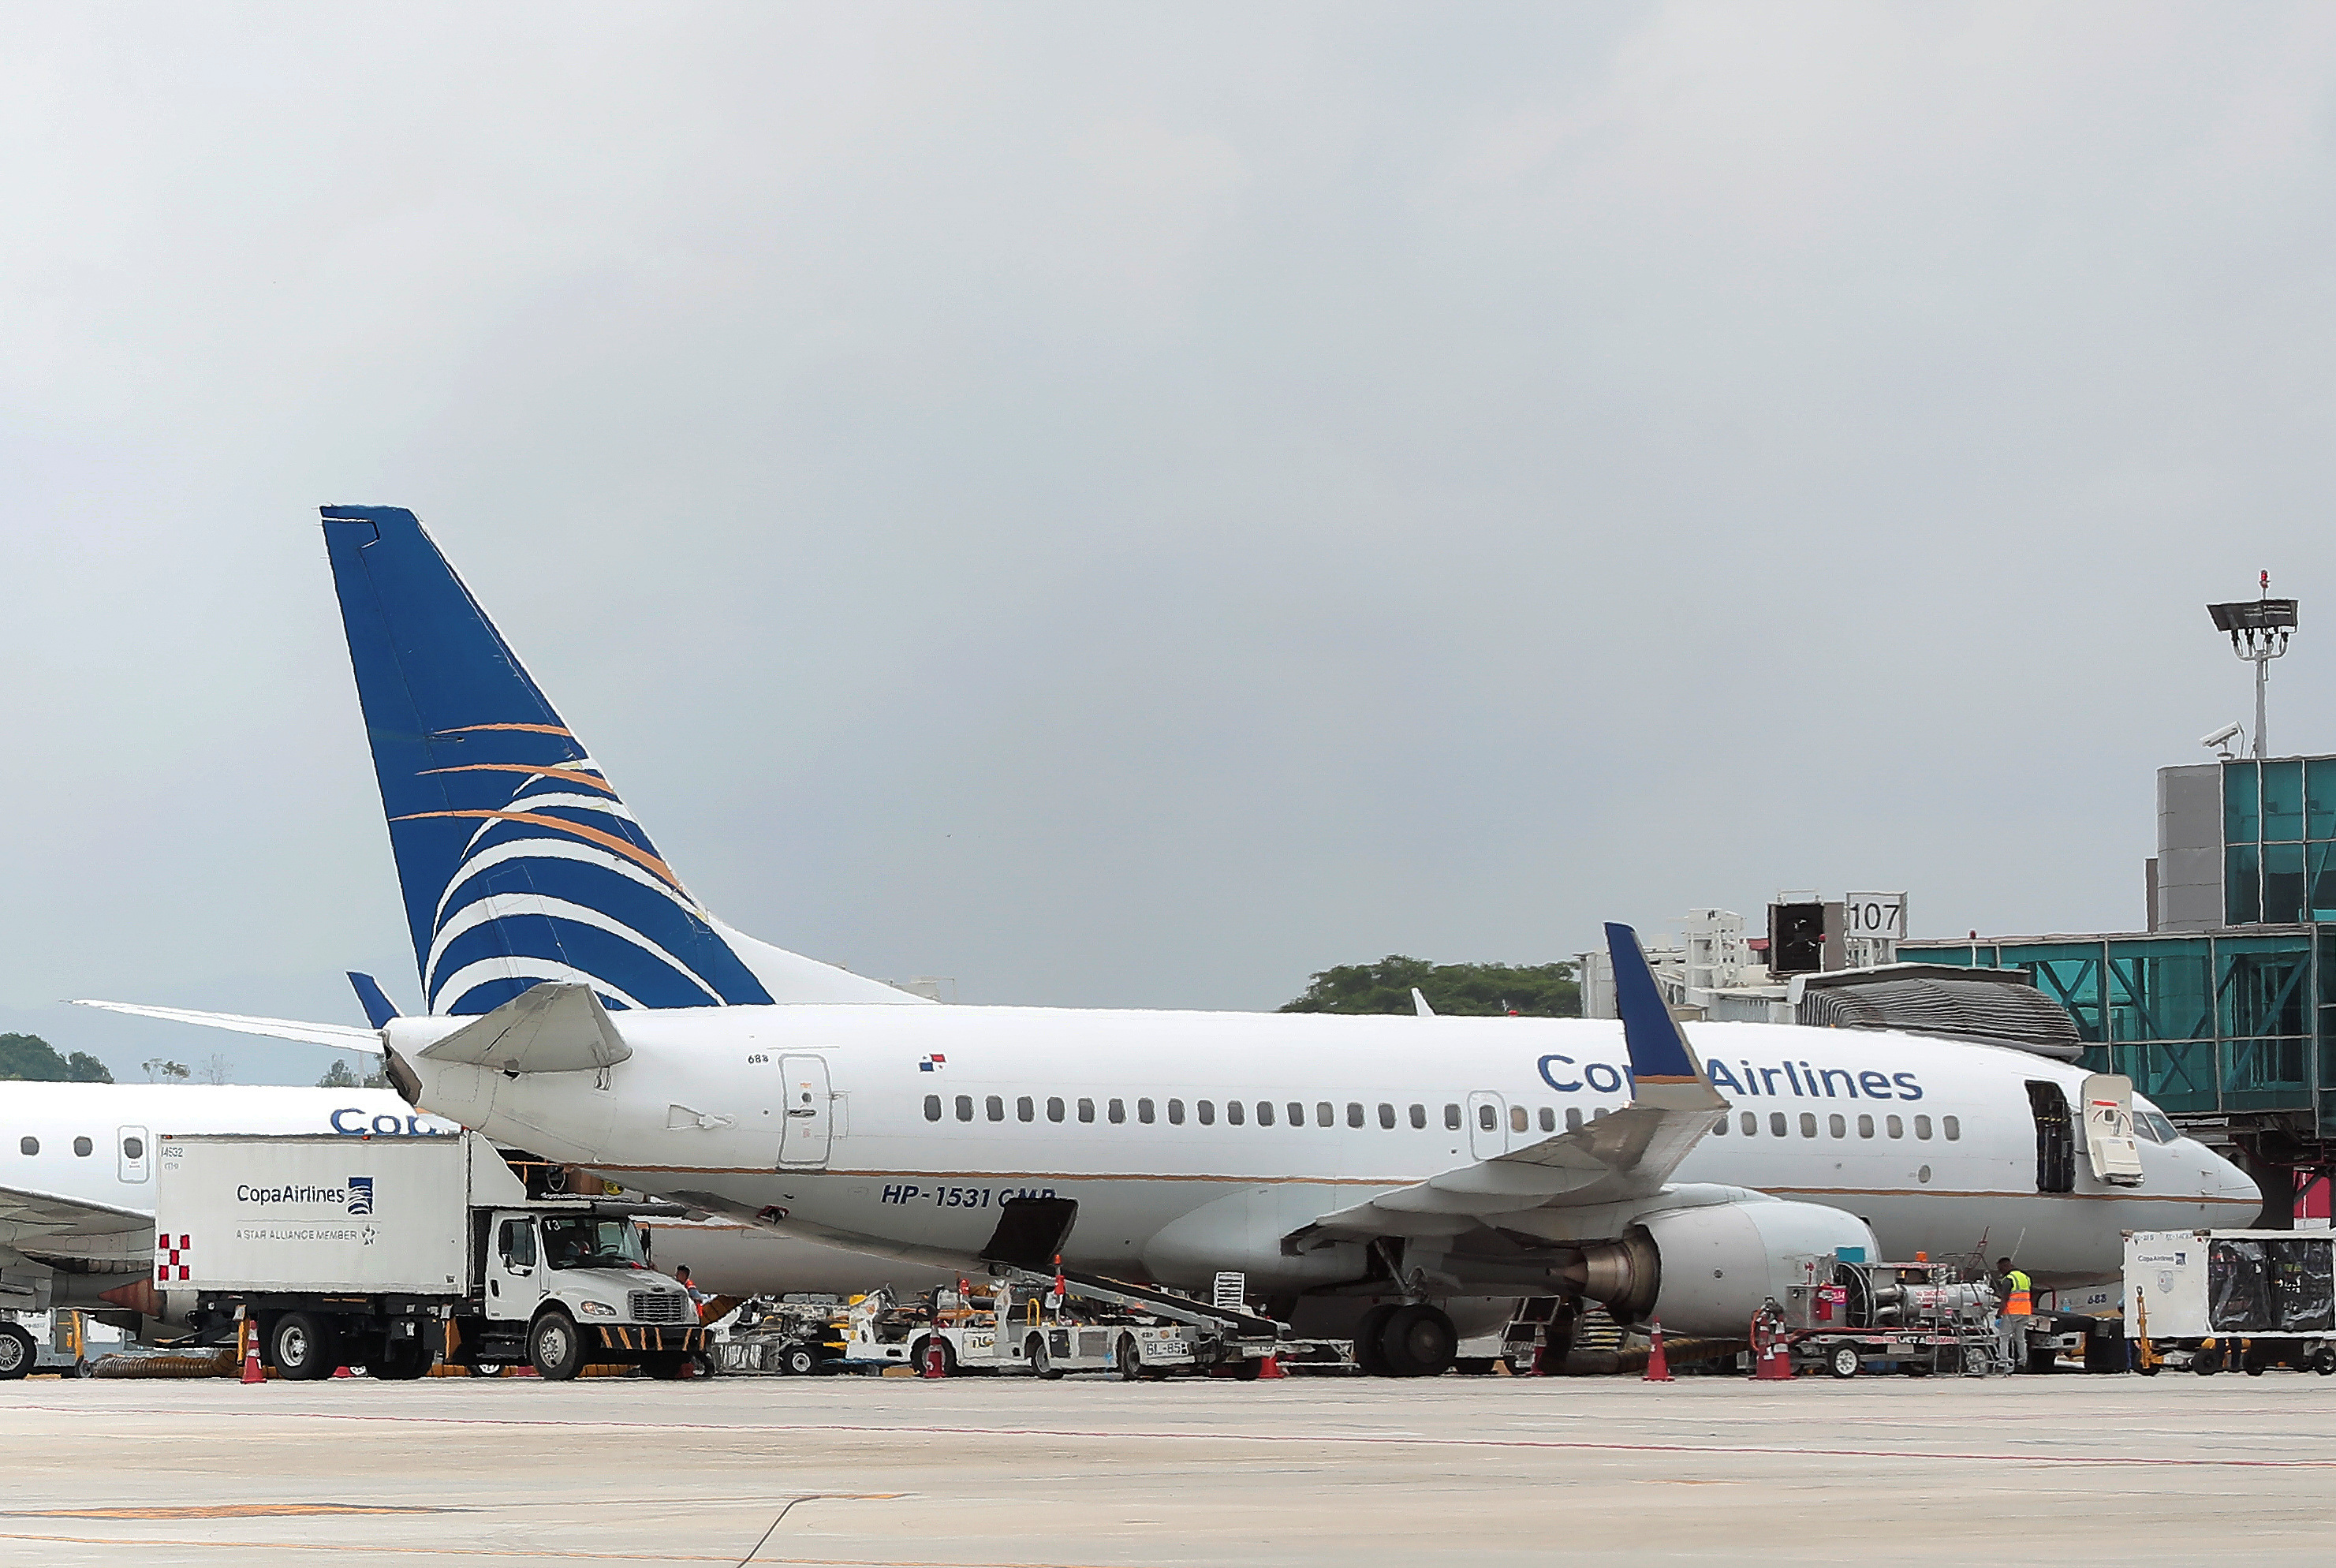 Copa Airlines' plane is pictured at Tocumen International Aiport after the company said it will suspend all operations in order to weather the coronavirus disease (COVID-19) crisis, in Panama City